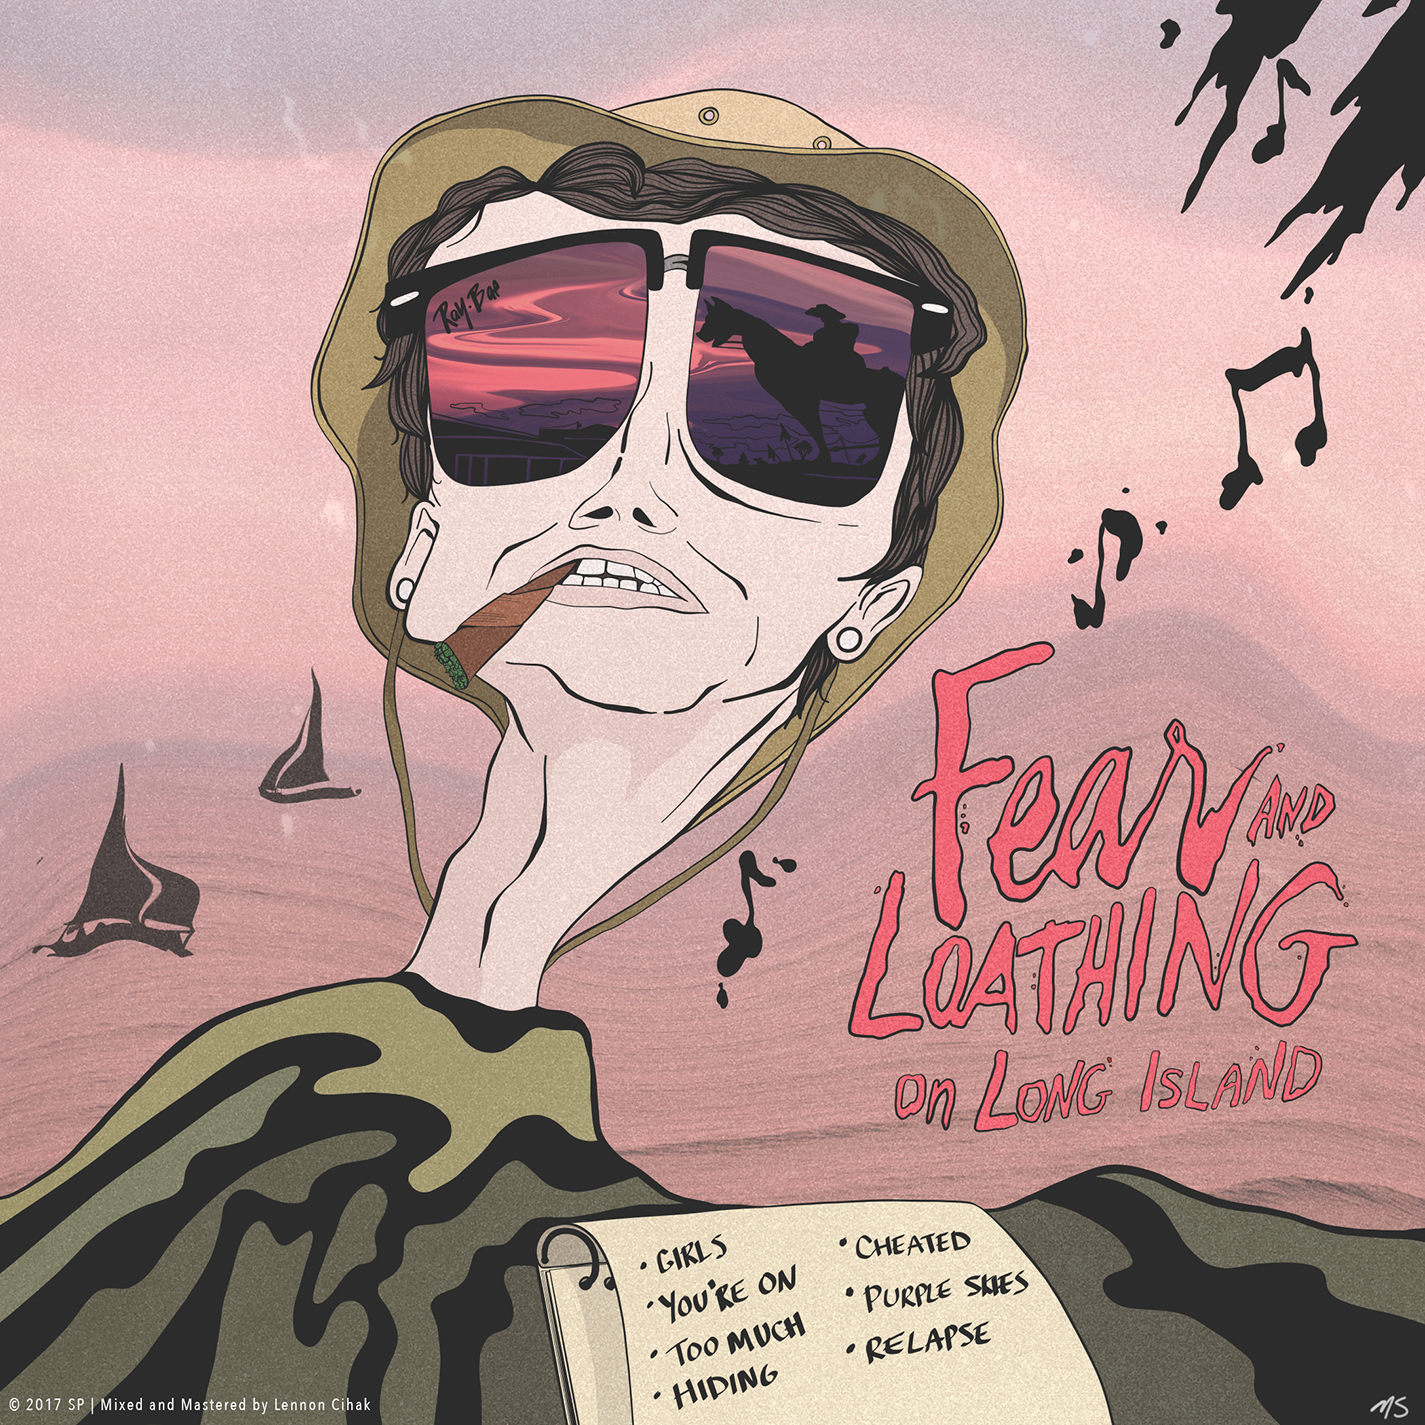 shawn-patrick-fear-and-loathing-on-long-island